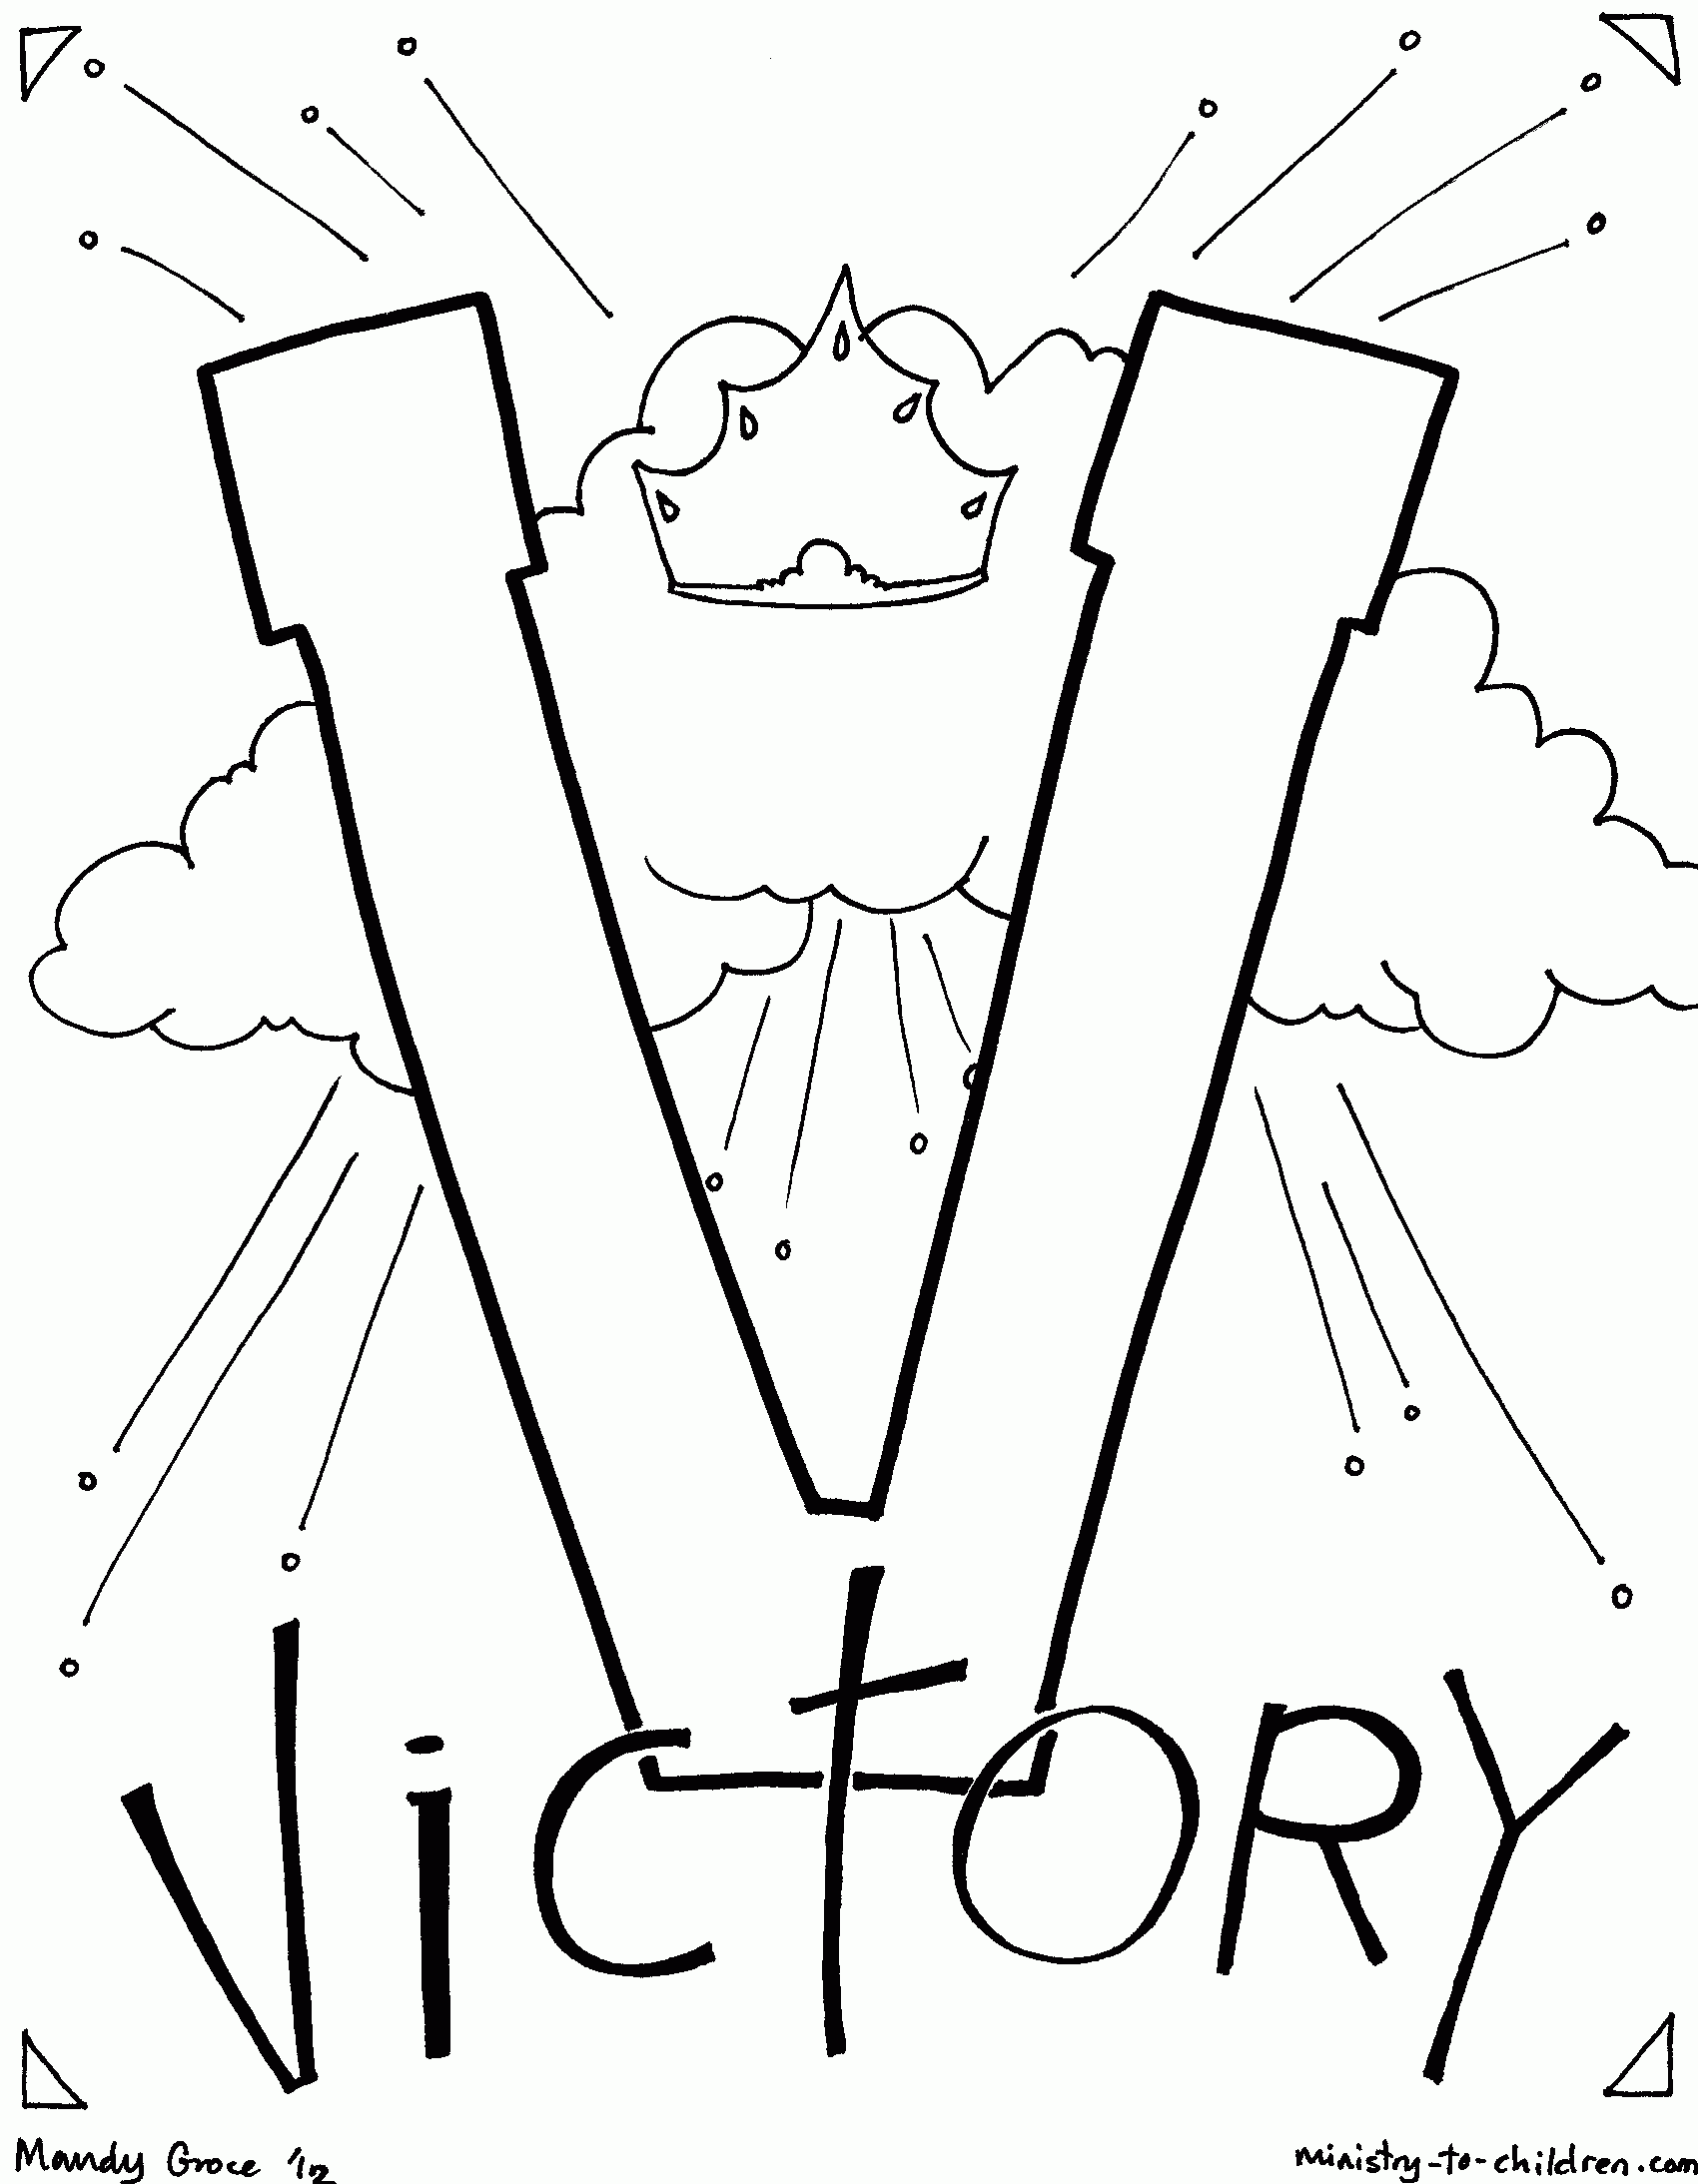 Victorious Pictures To Color - Coloring Pages for Kids and for Adults